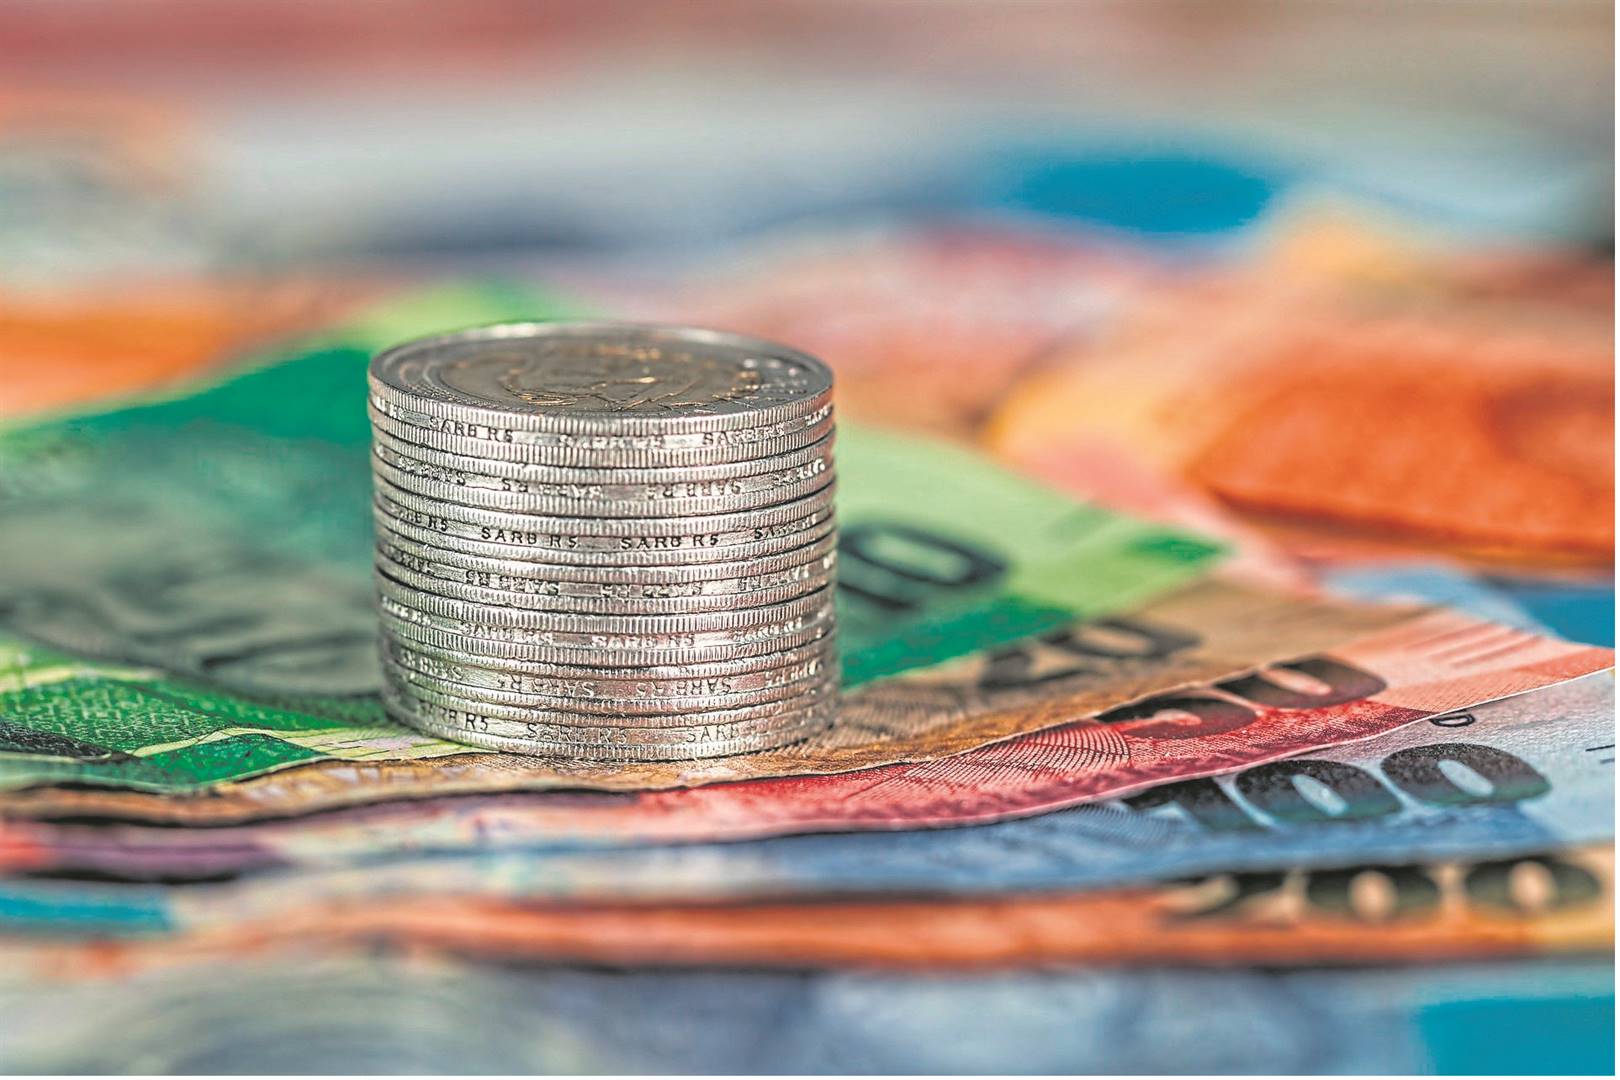 South African salaries are declining and have not bounced back to levels seen four years ago.